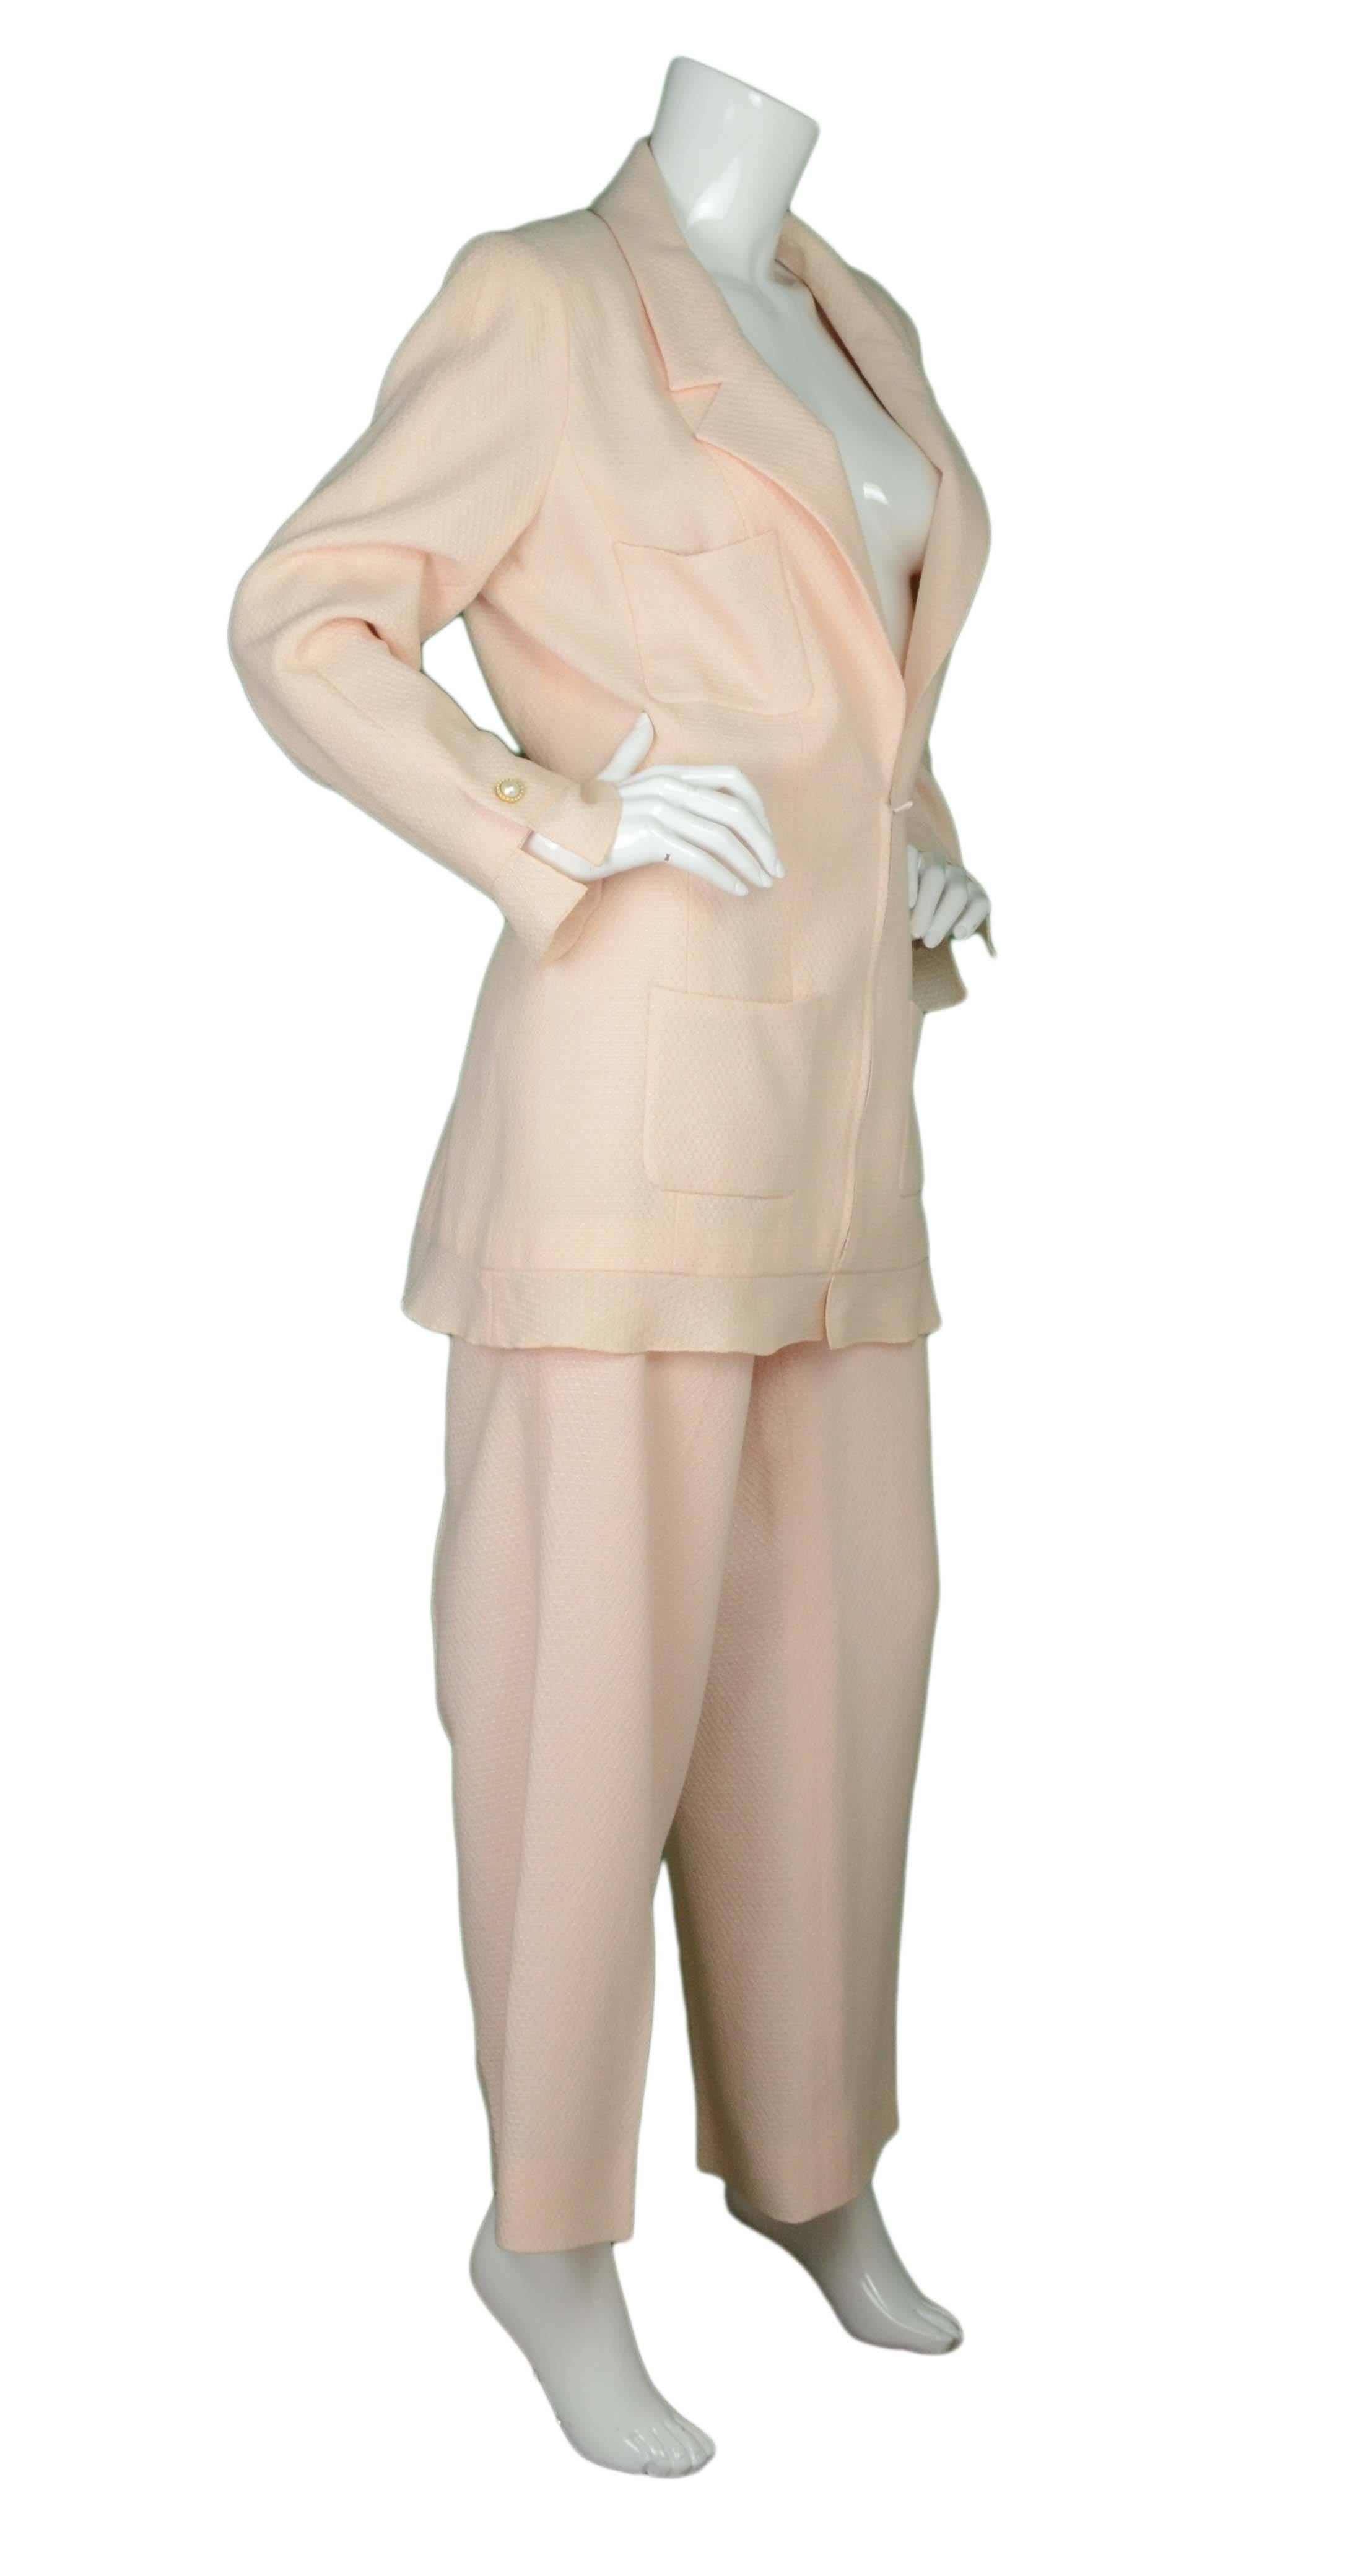 Chanel Pale Pink Wool Pant Suit 
Features faux pearl button details
Made In: France
Year of Production: 2002
Color: Pale pink/peach
Composition: 52% rayon, 48% wool
Lining: Jacket- pale pink, 95% silk, 5% spandex, Pants- pale pink, 90% silk,